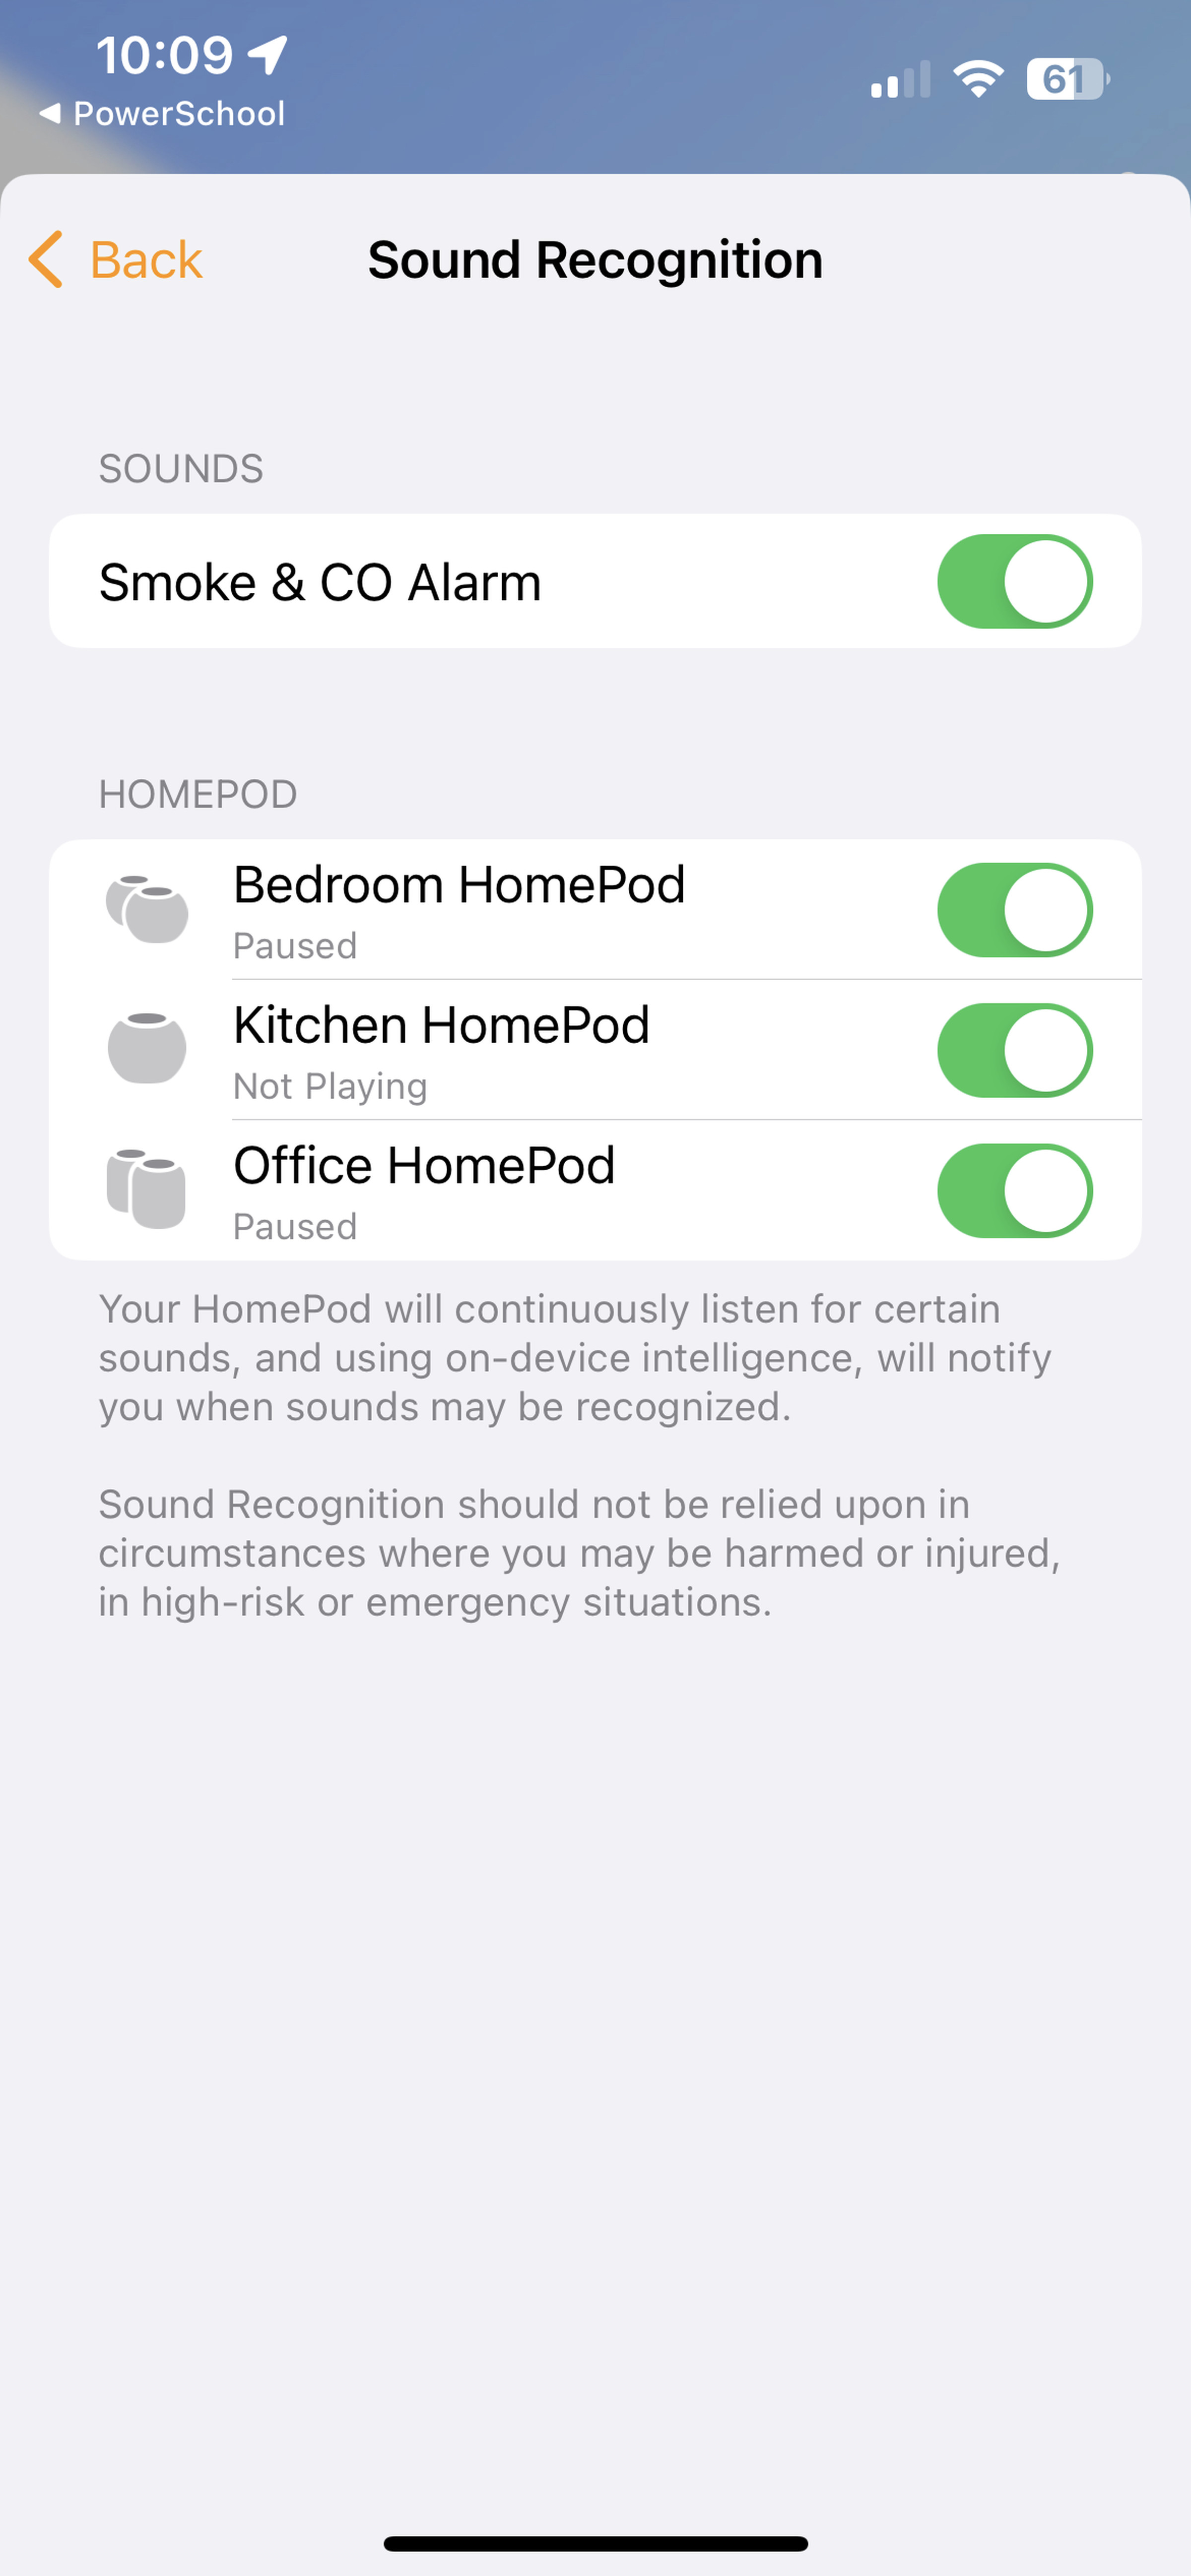 <em>From here, you can turn Sound Recognition off for all HomePods or each individually.</em>